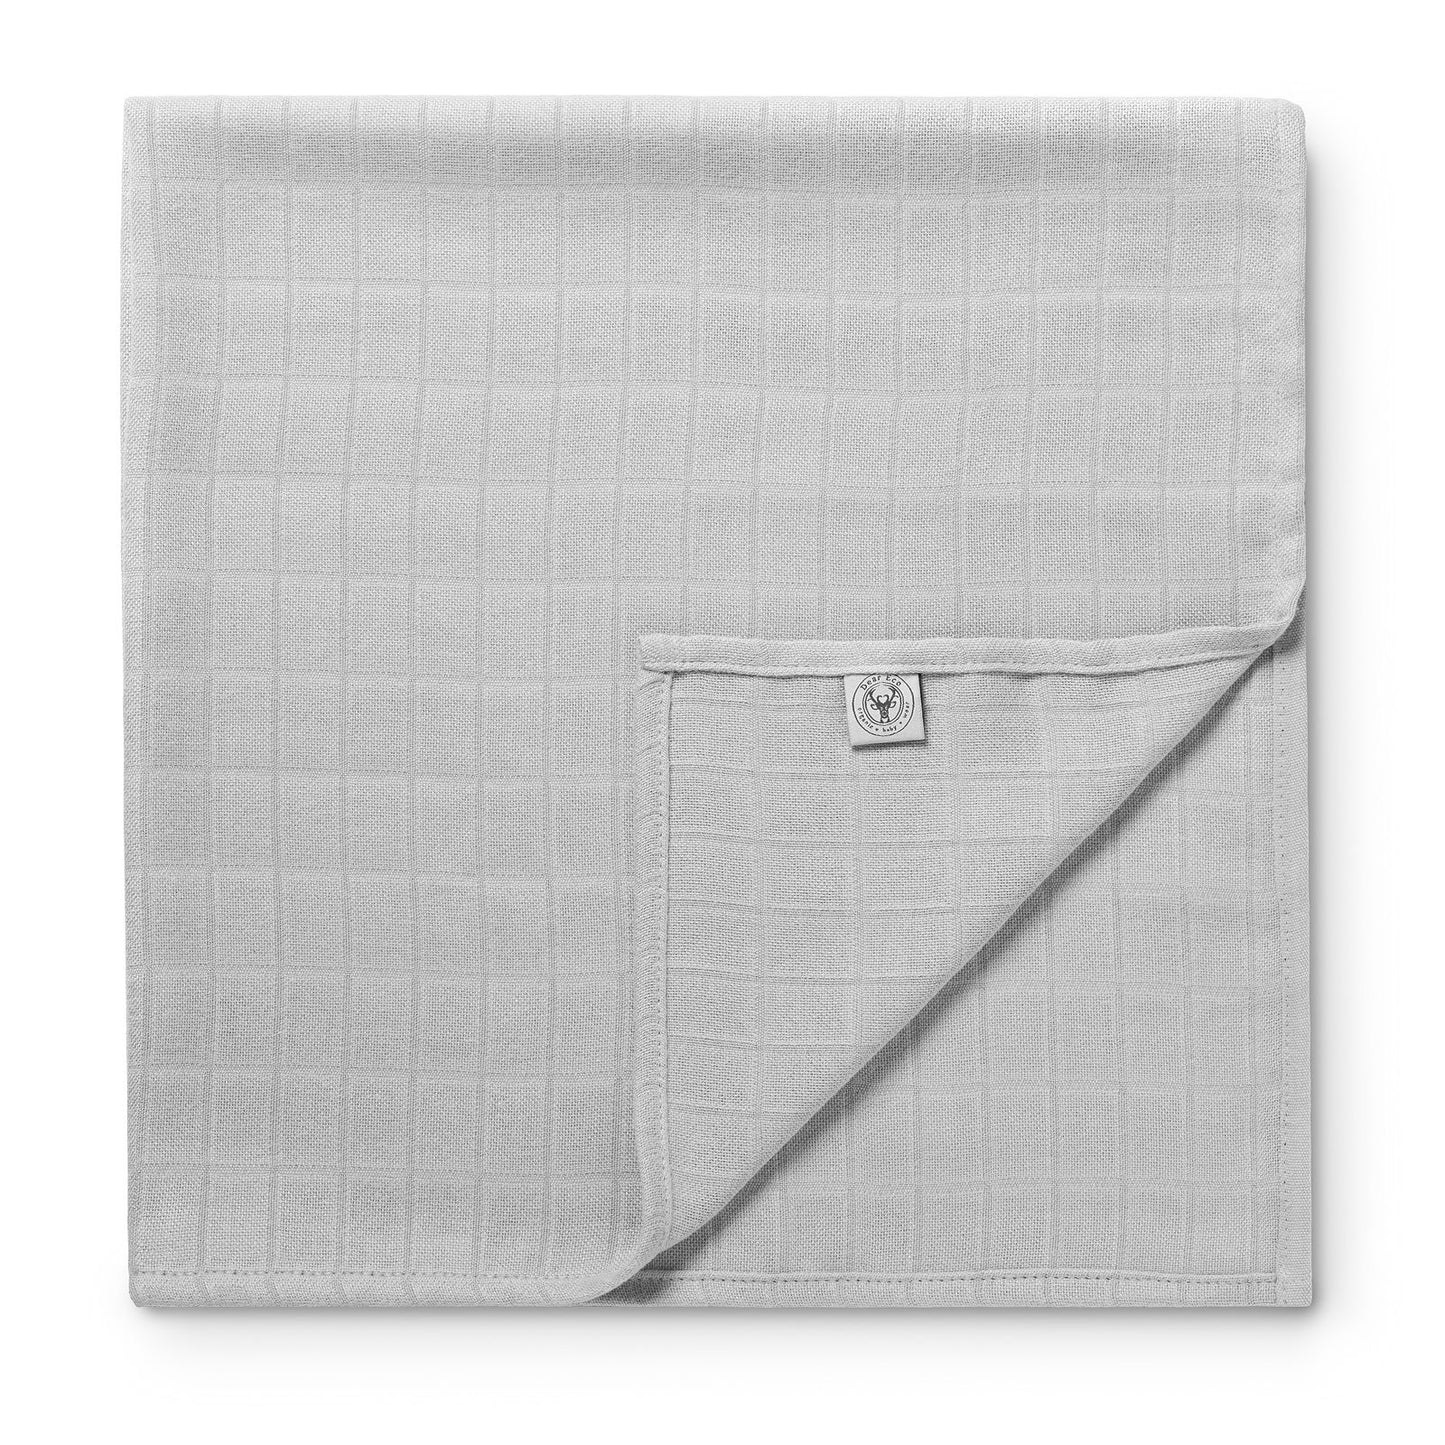 White & Gray Bamboo Swaddle Blankets